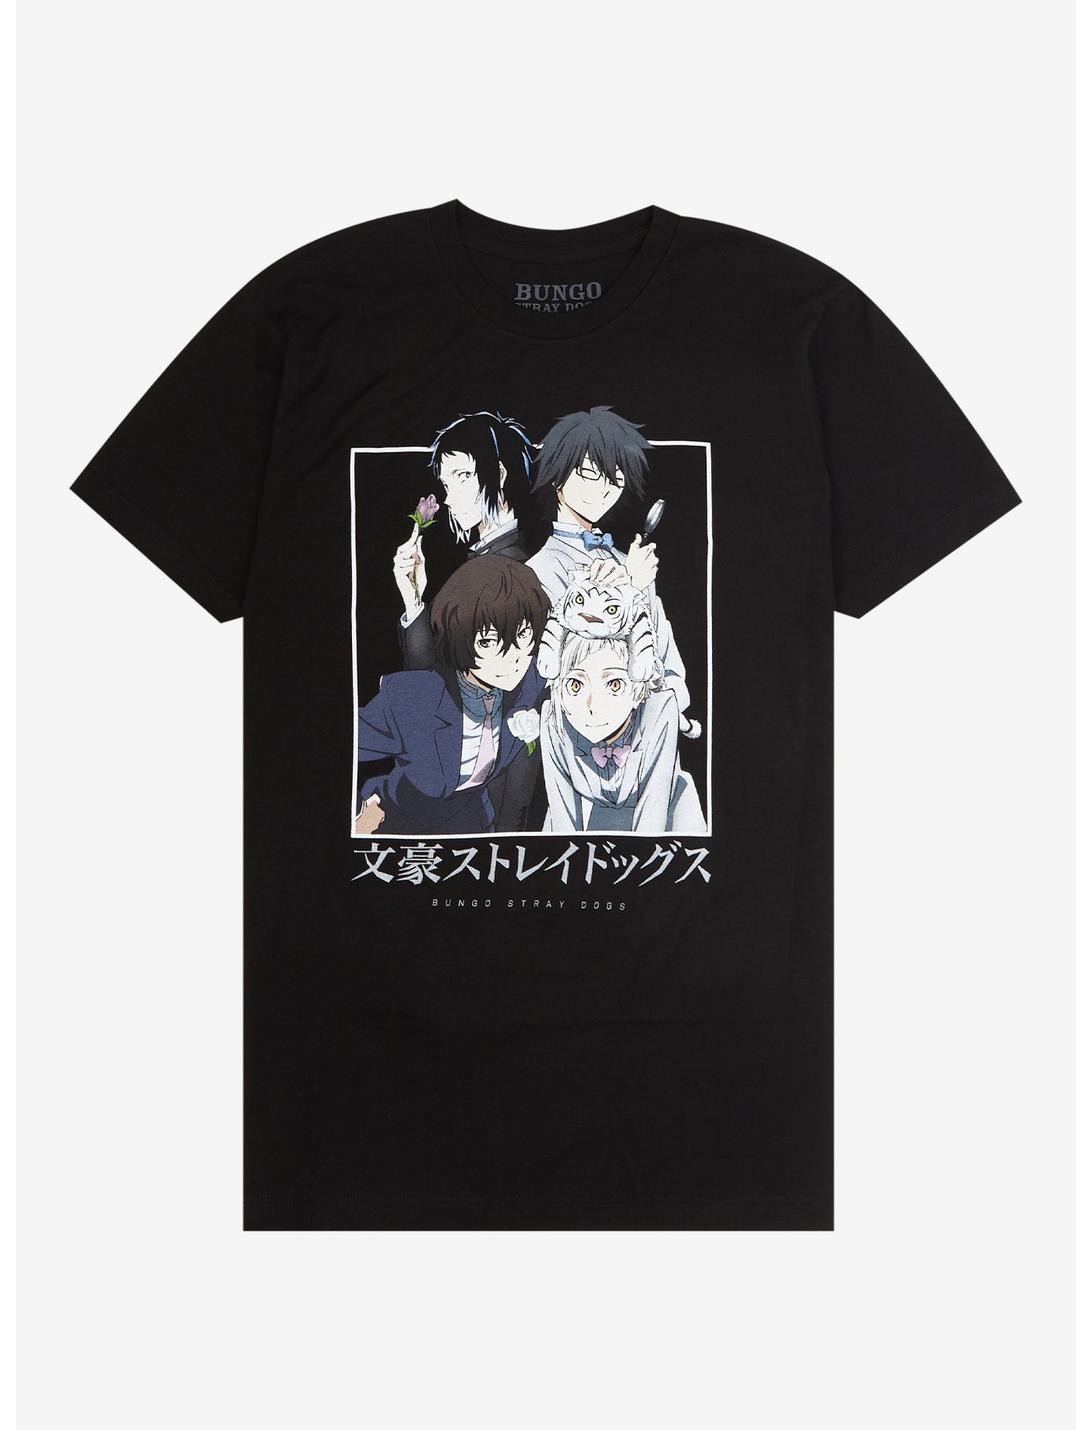 Bungo Stray Dogs Group Formal Suits T-Shirt, BLACK, hi-res